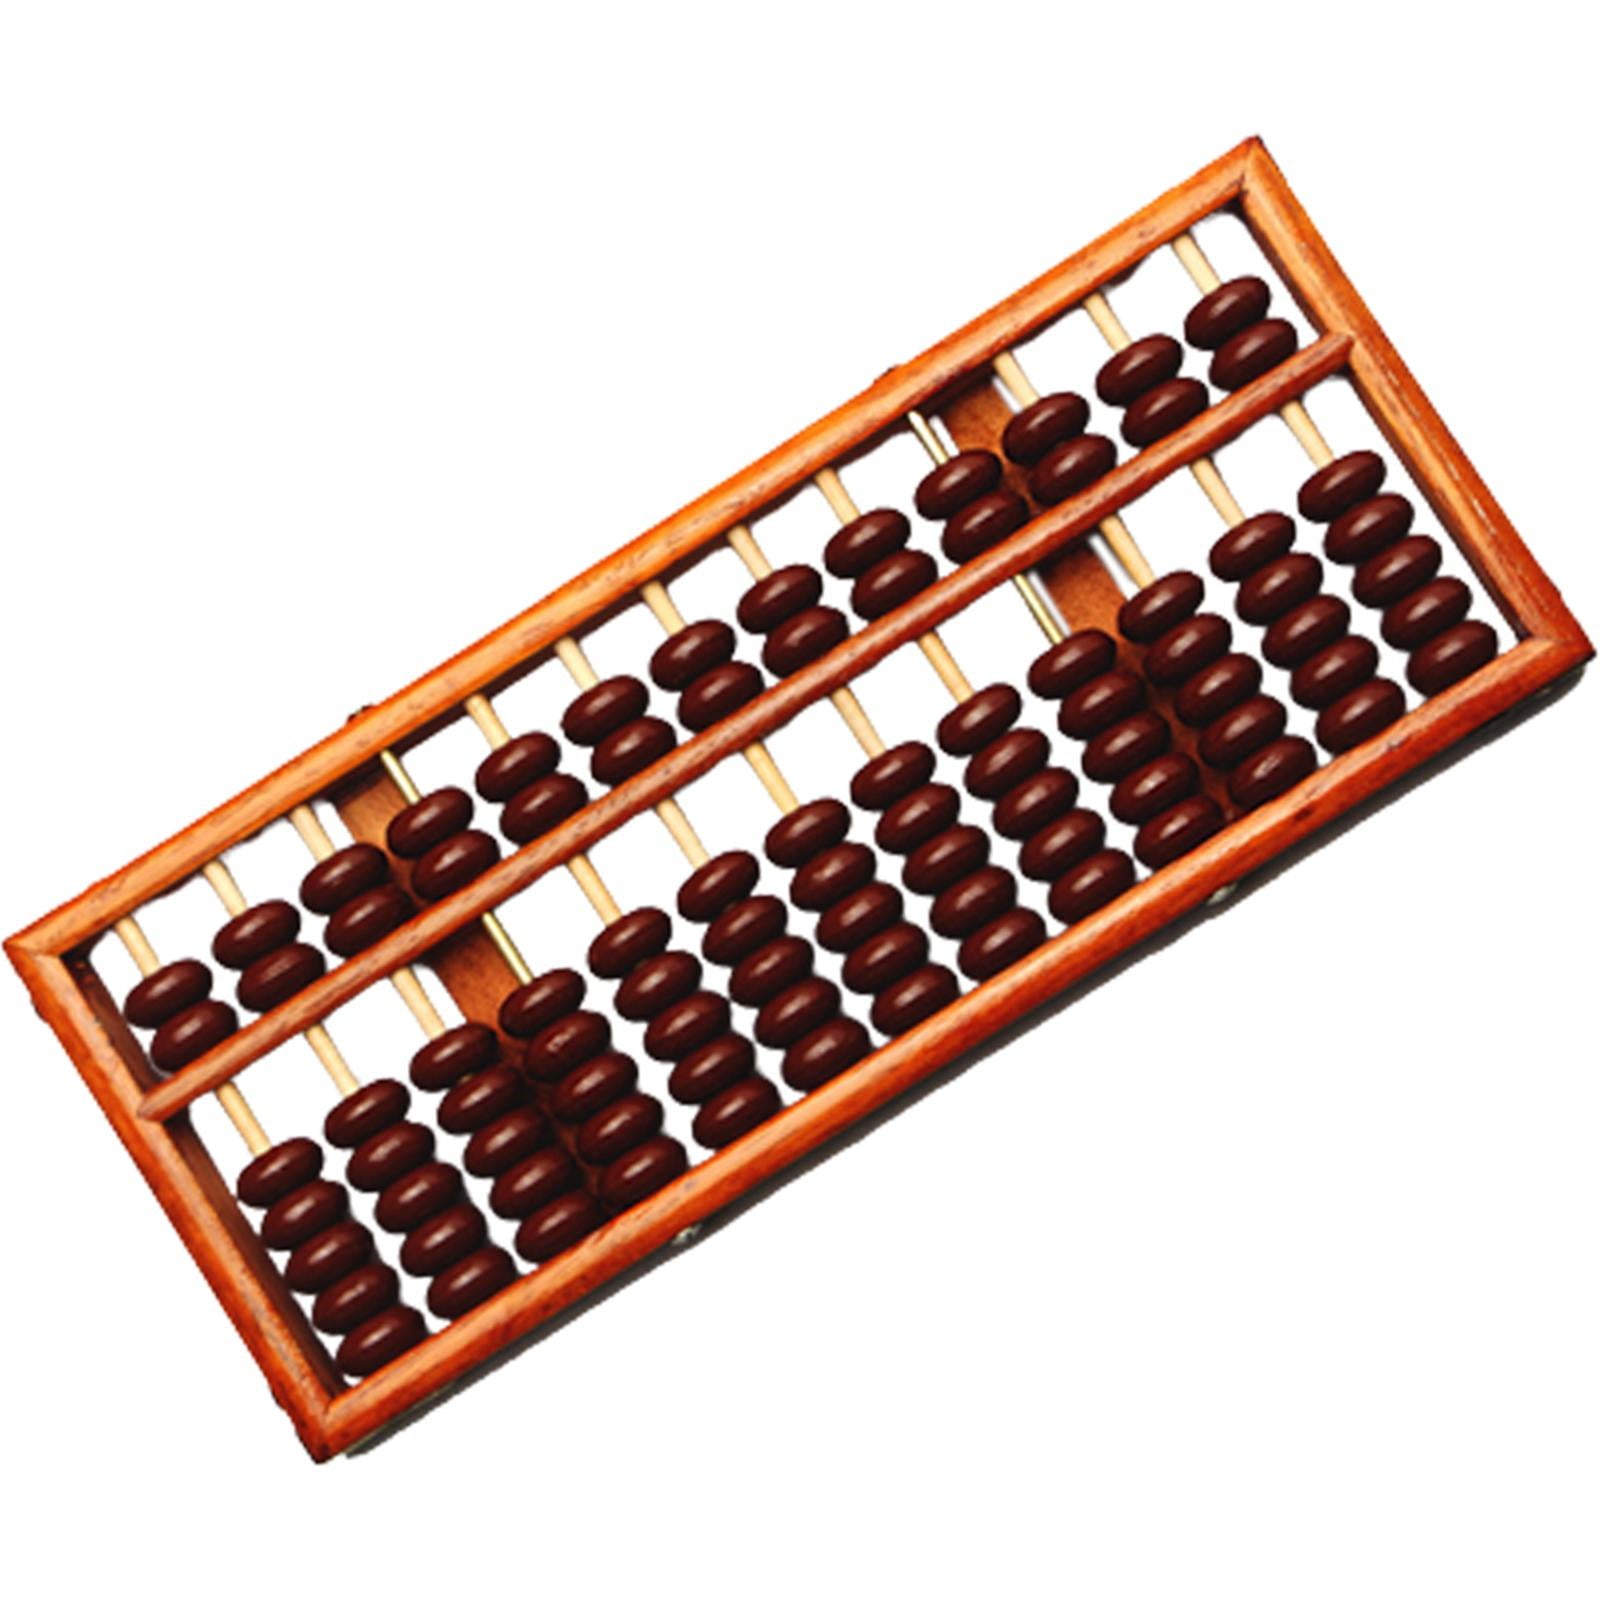 17 Digit Rods Standard Abacus Soroban Chinese Japanese Calculator Counting Too@I 